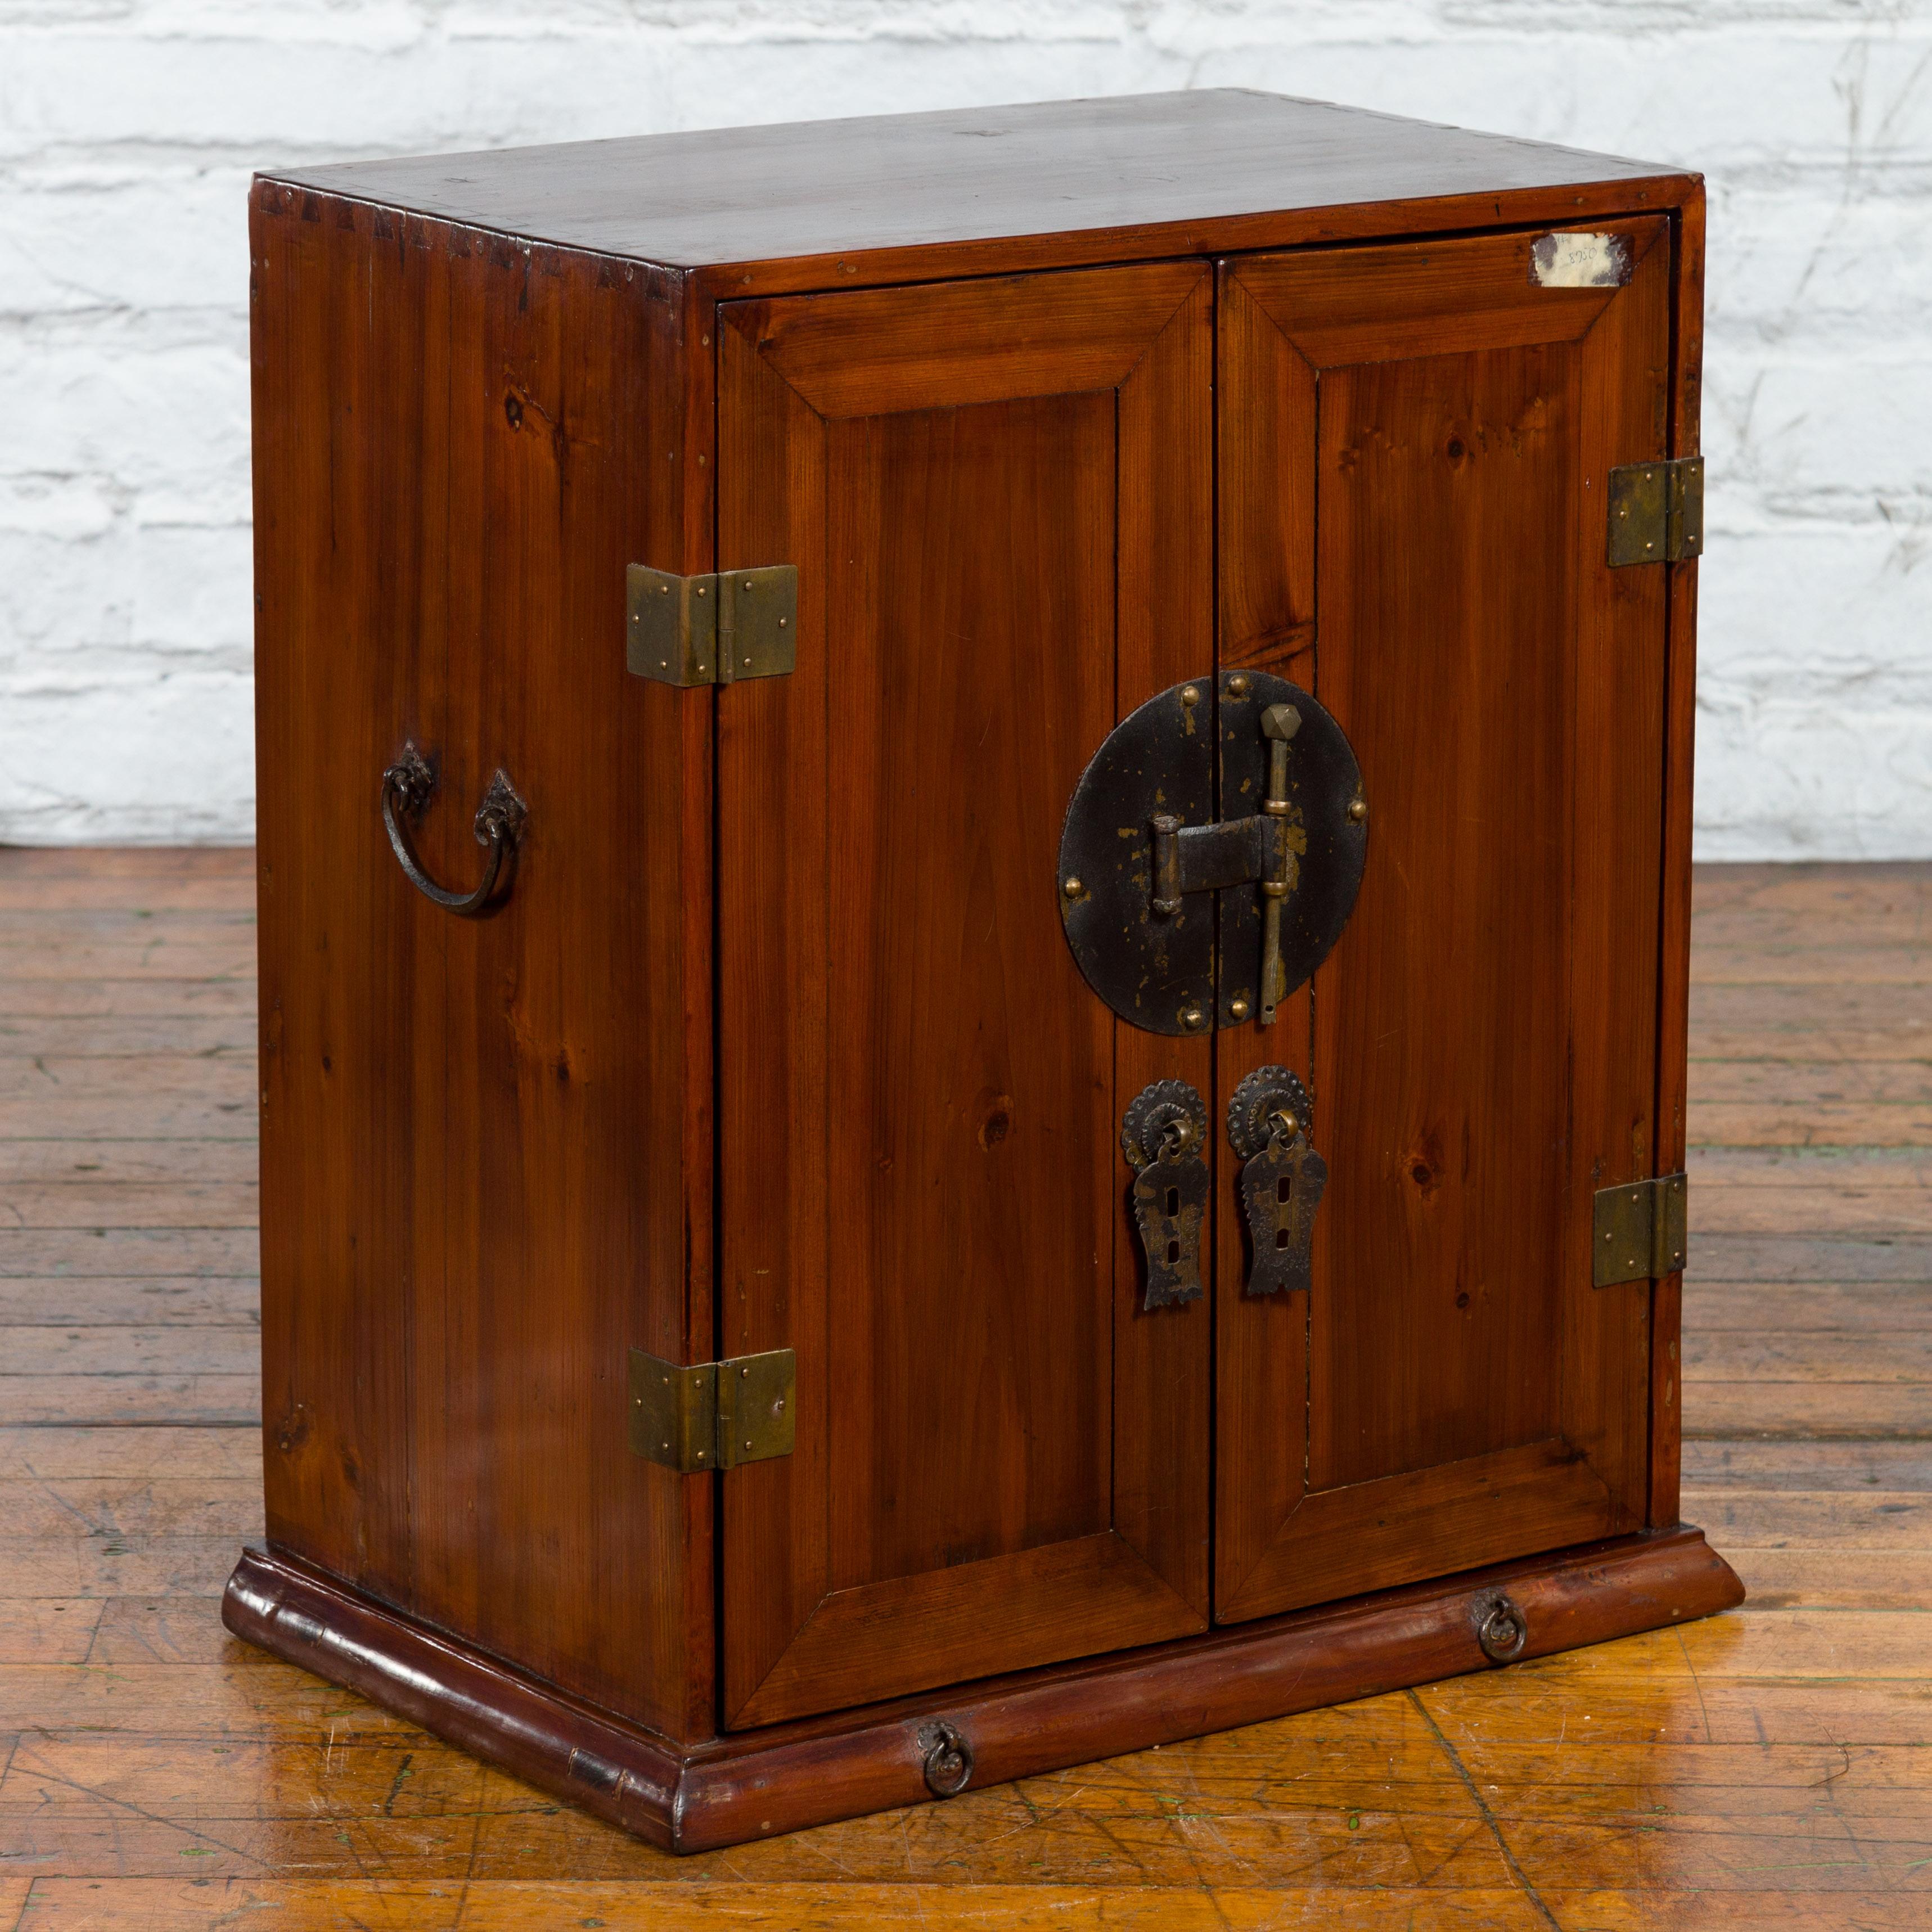 A Chinese Qing Dynasty period elm wood side cabinet from the 19th century, with two doors, bronze hardware, inner shelves and hidden drawers. Created in China during the Qing Dynasty period in the 19th century, this elm wood side cabinet features a